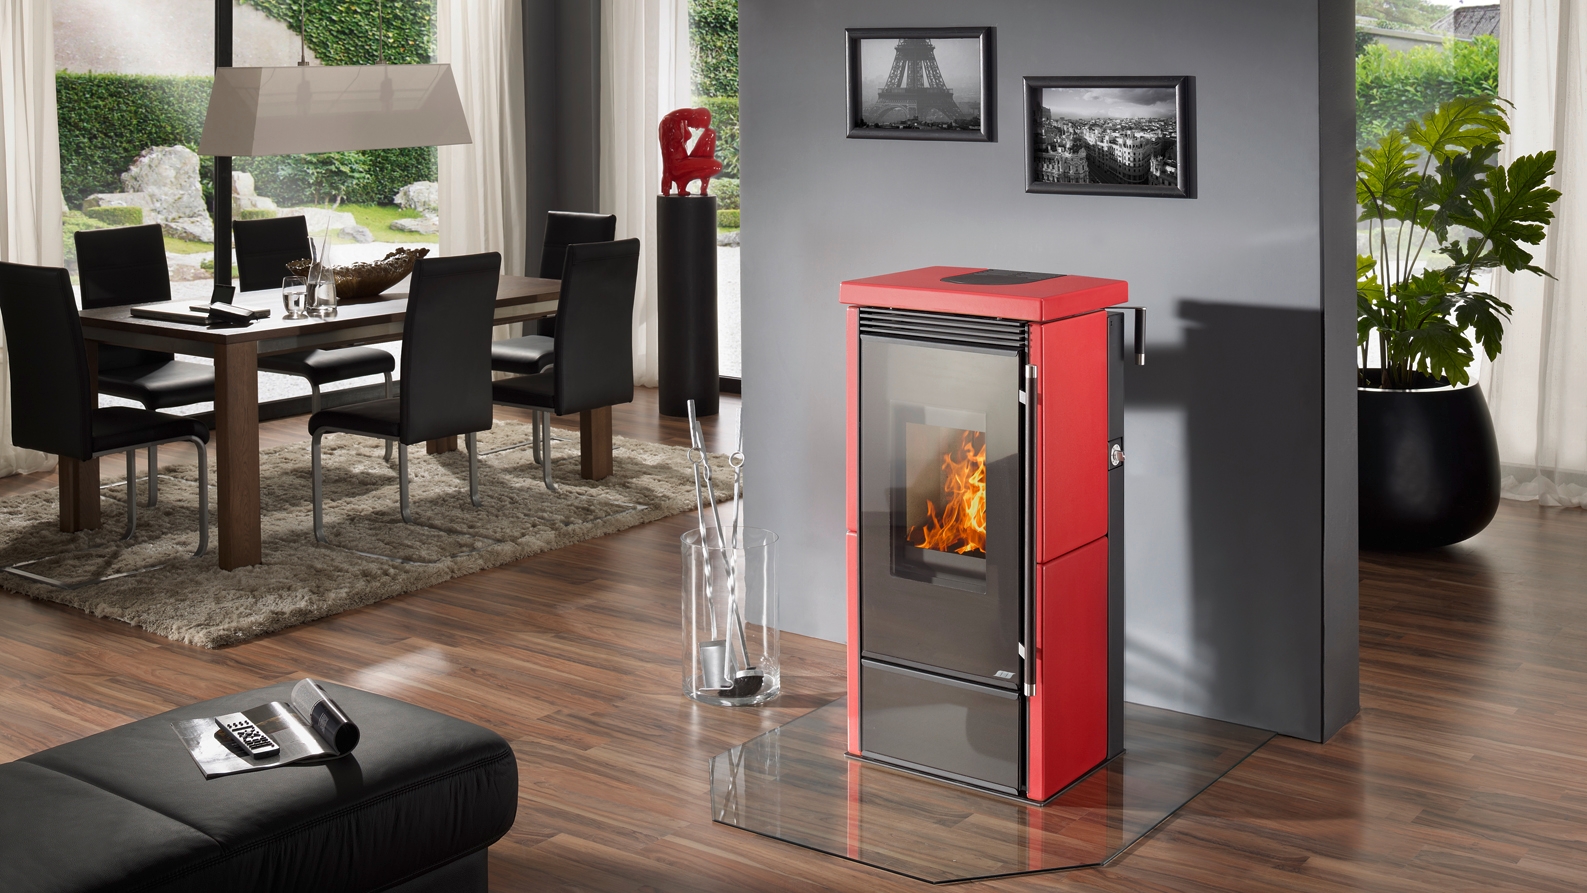 Pellet stoves combustion products